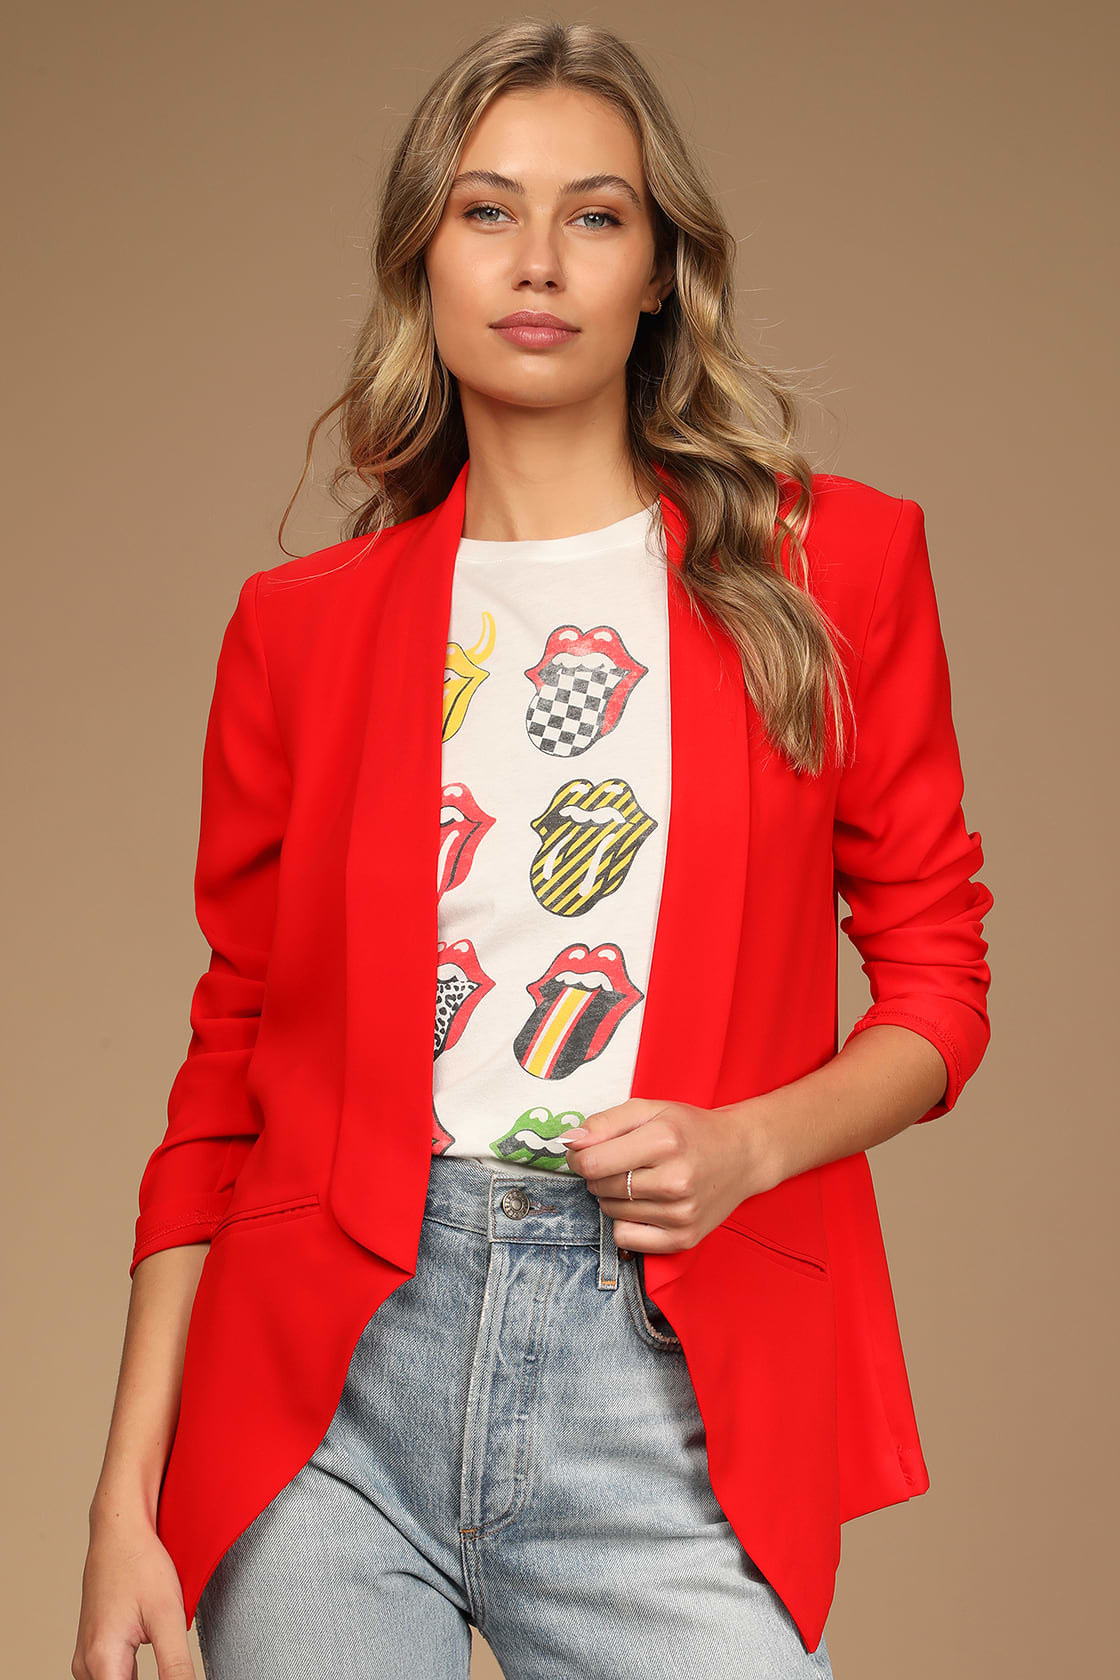 Model wearing red blazer over band tee with jeans